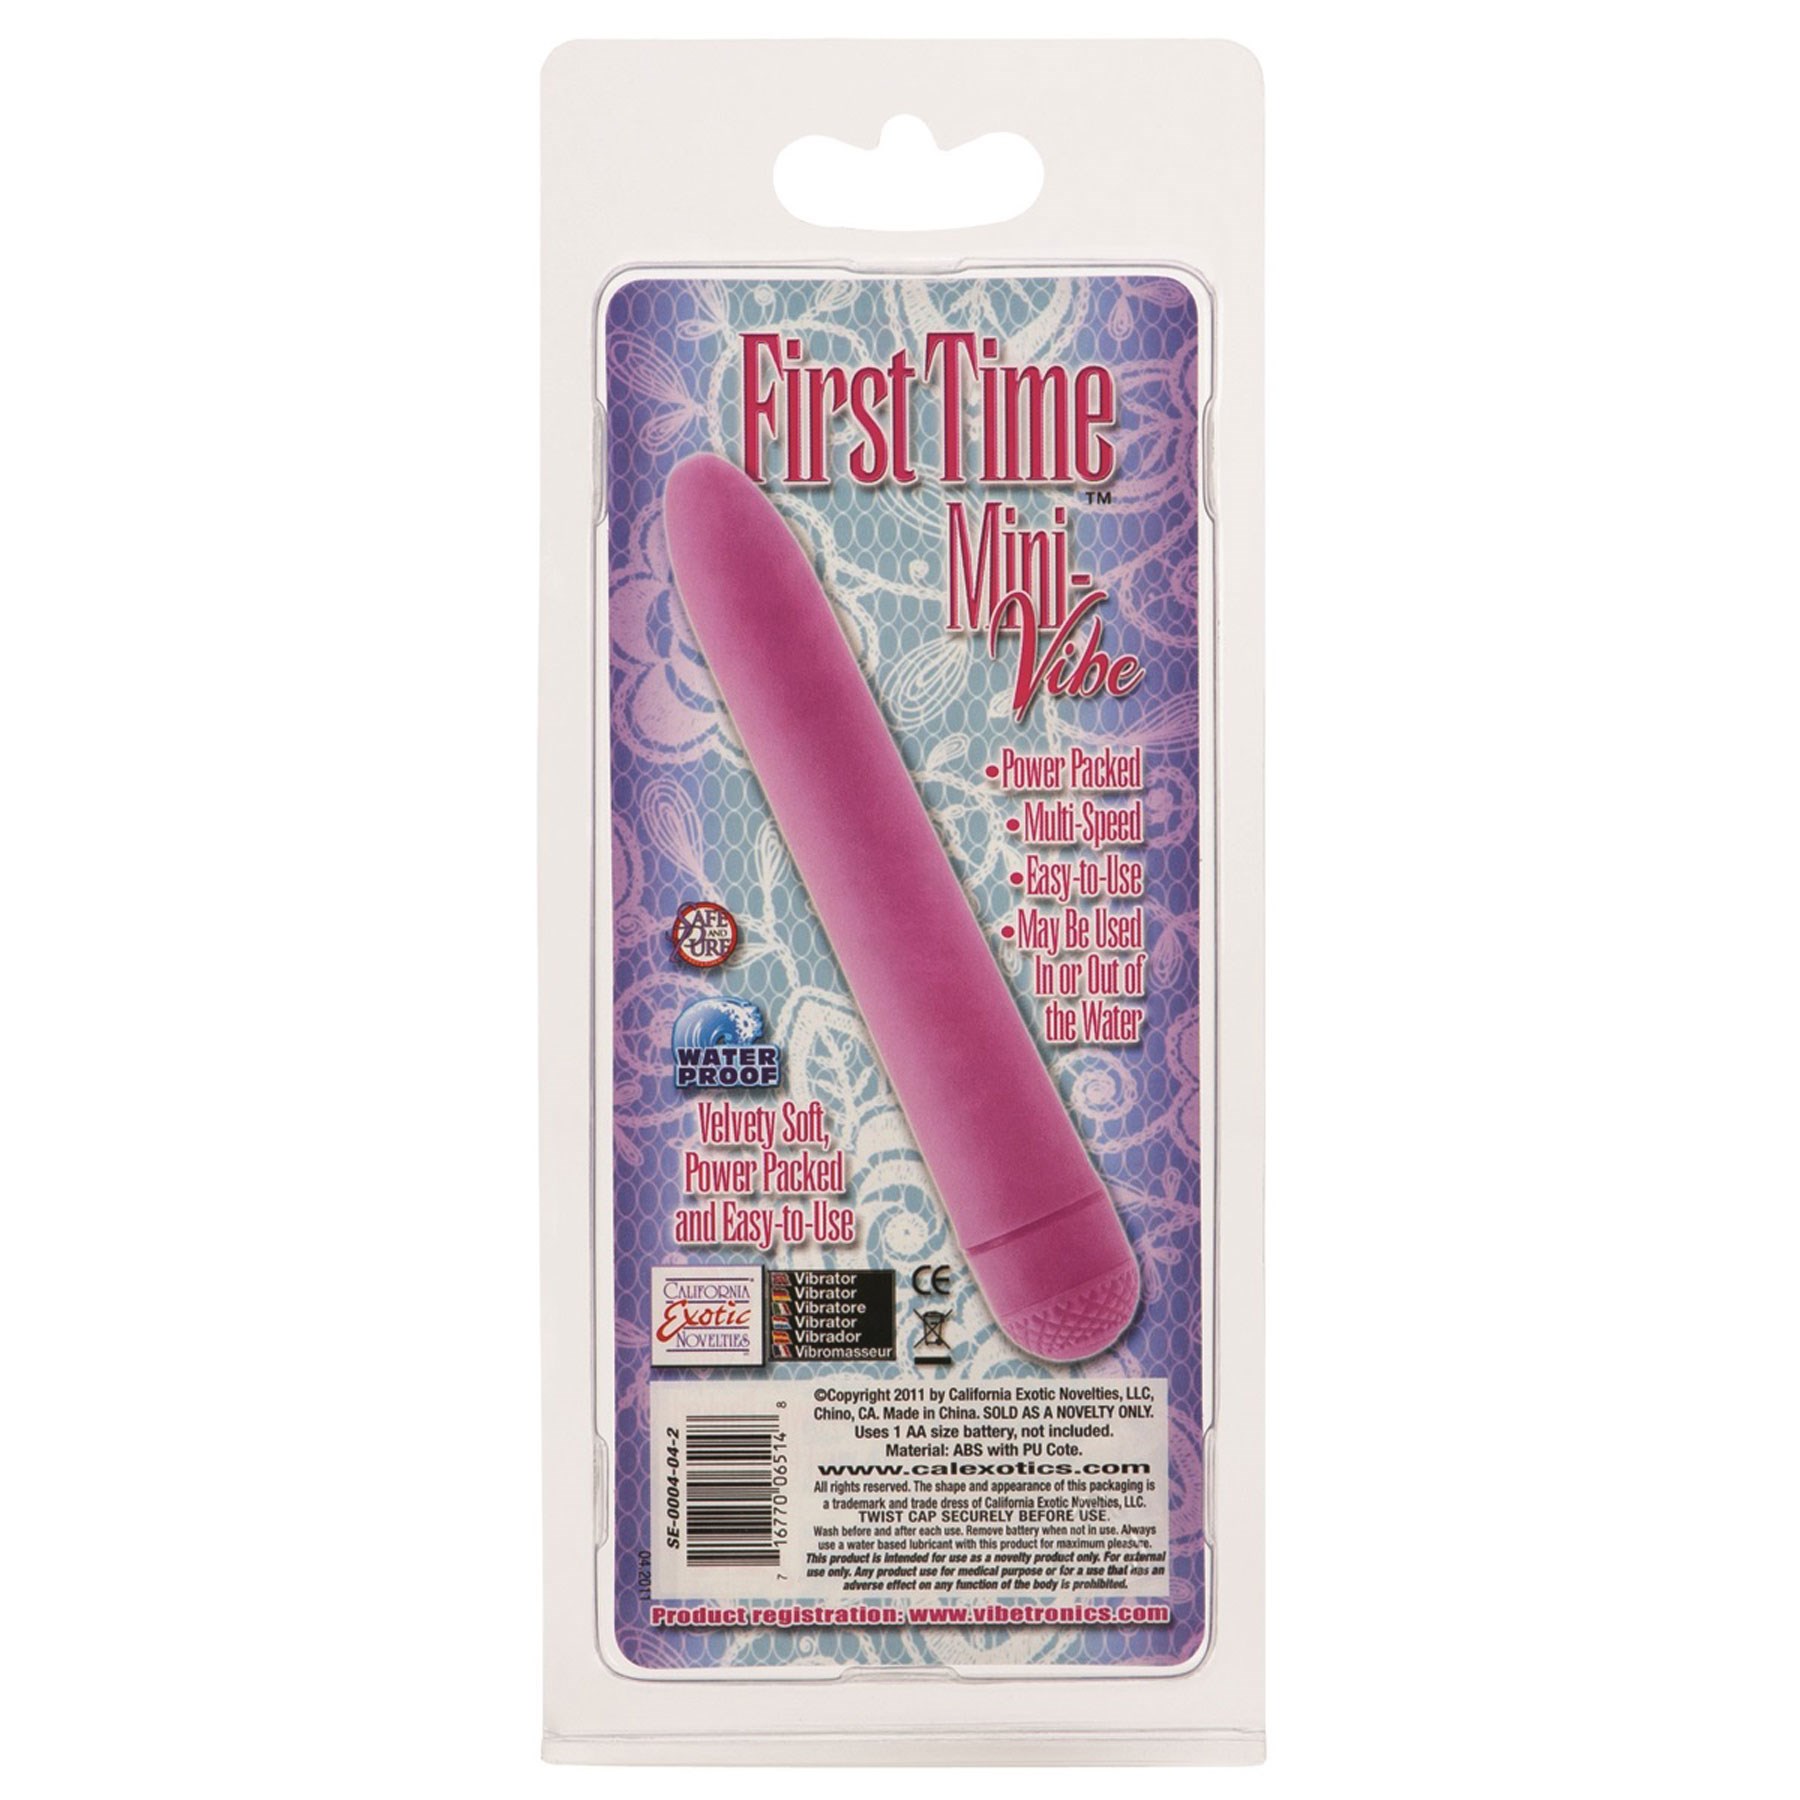 First Time Mini Vibrator back package